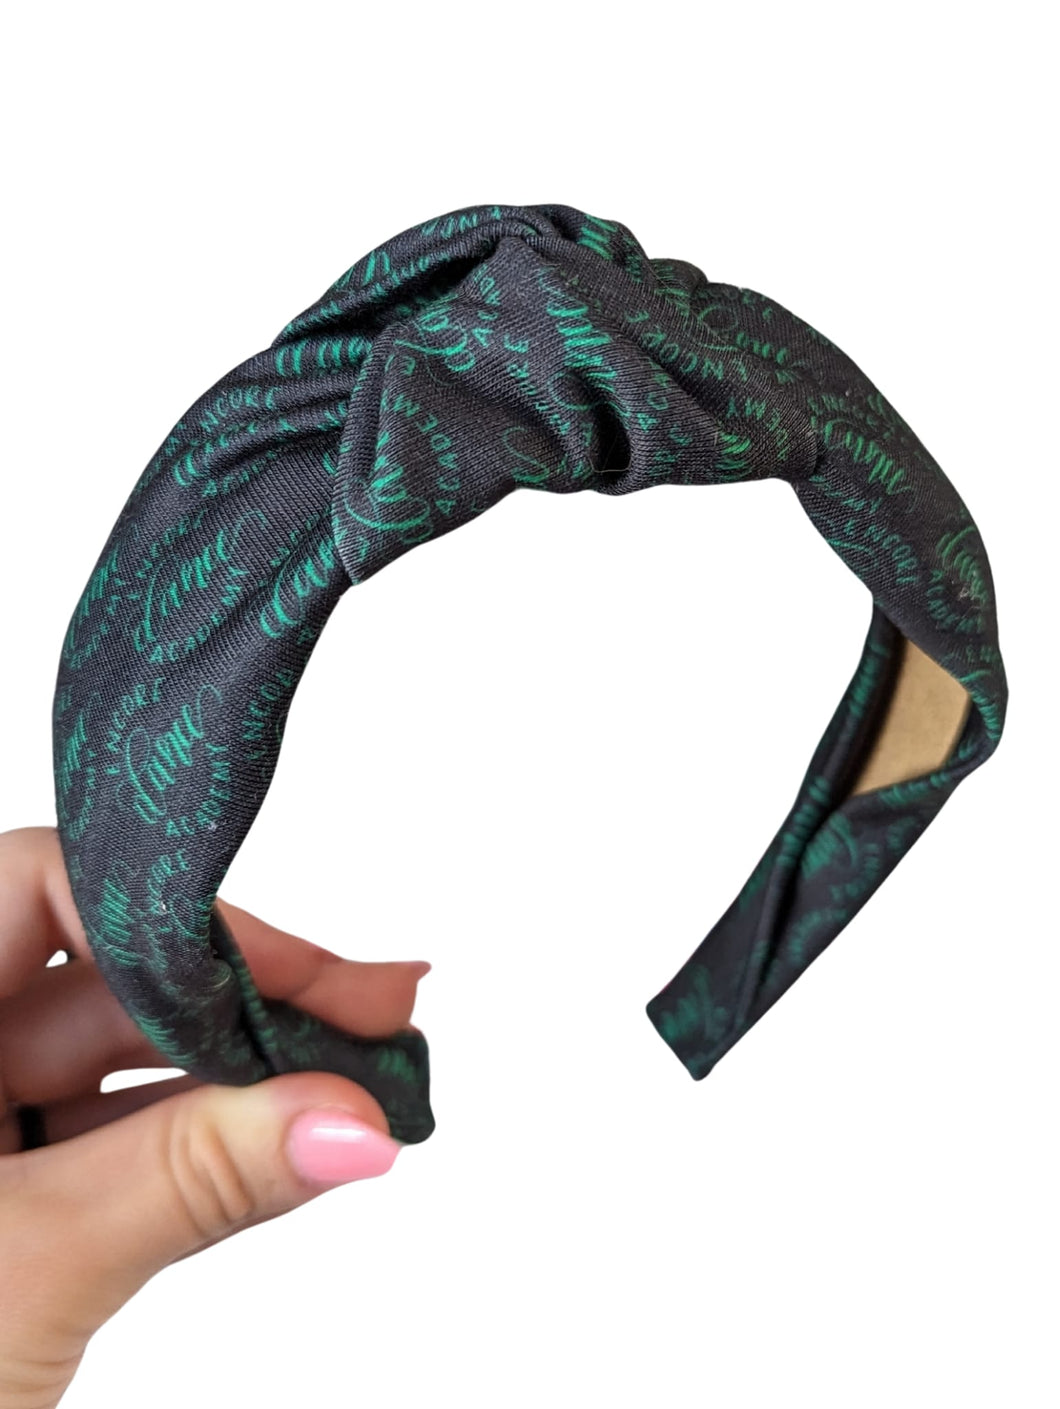 Encore Dance Academy Knotted Headband | Black {PRE-ORDER}